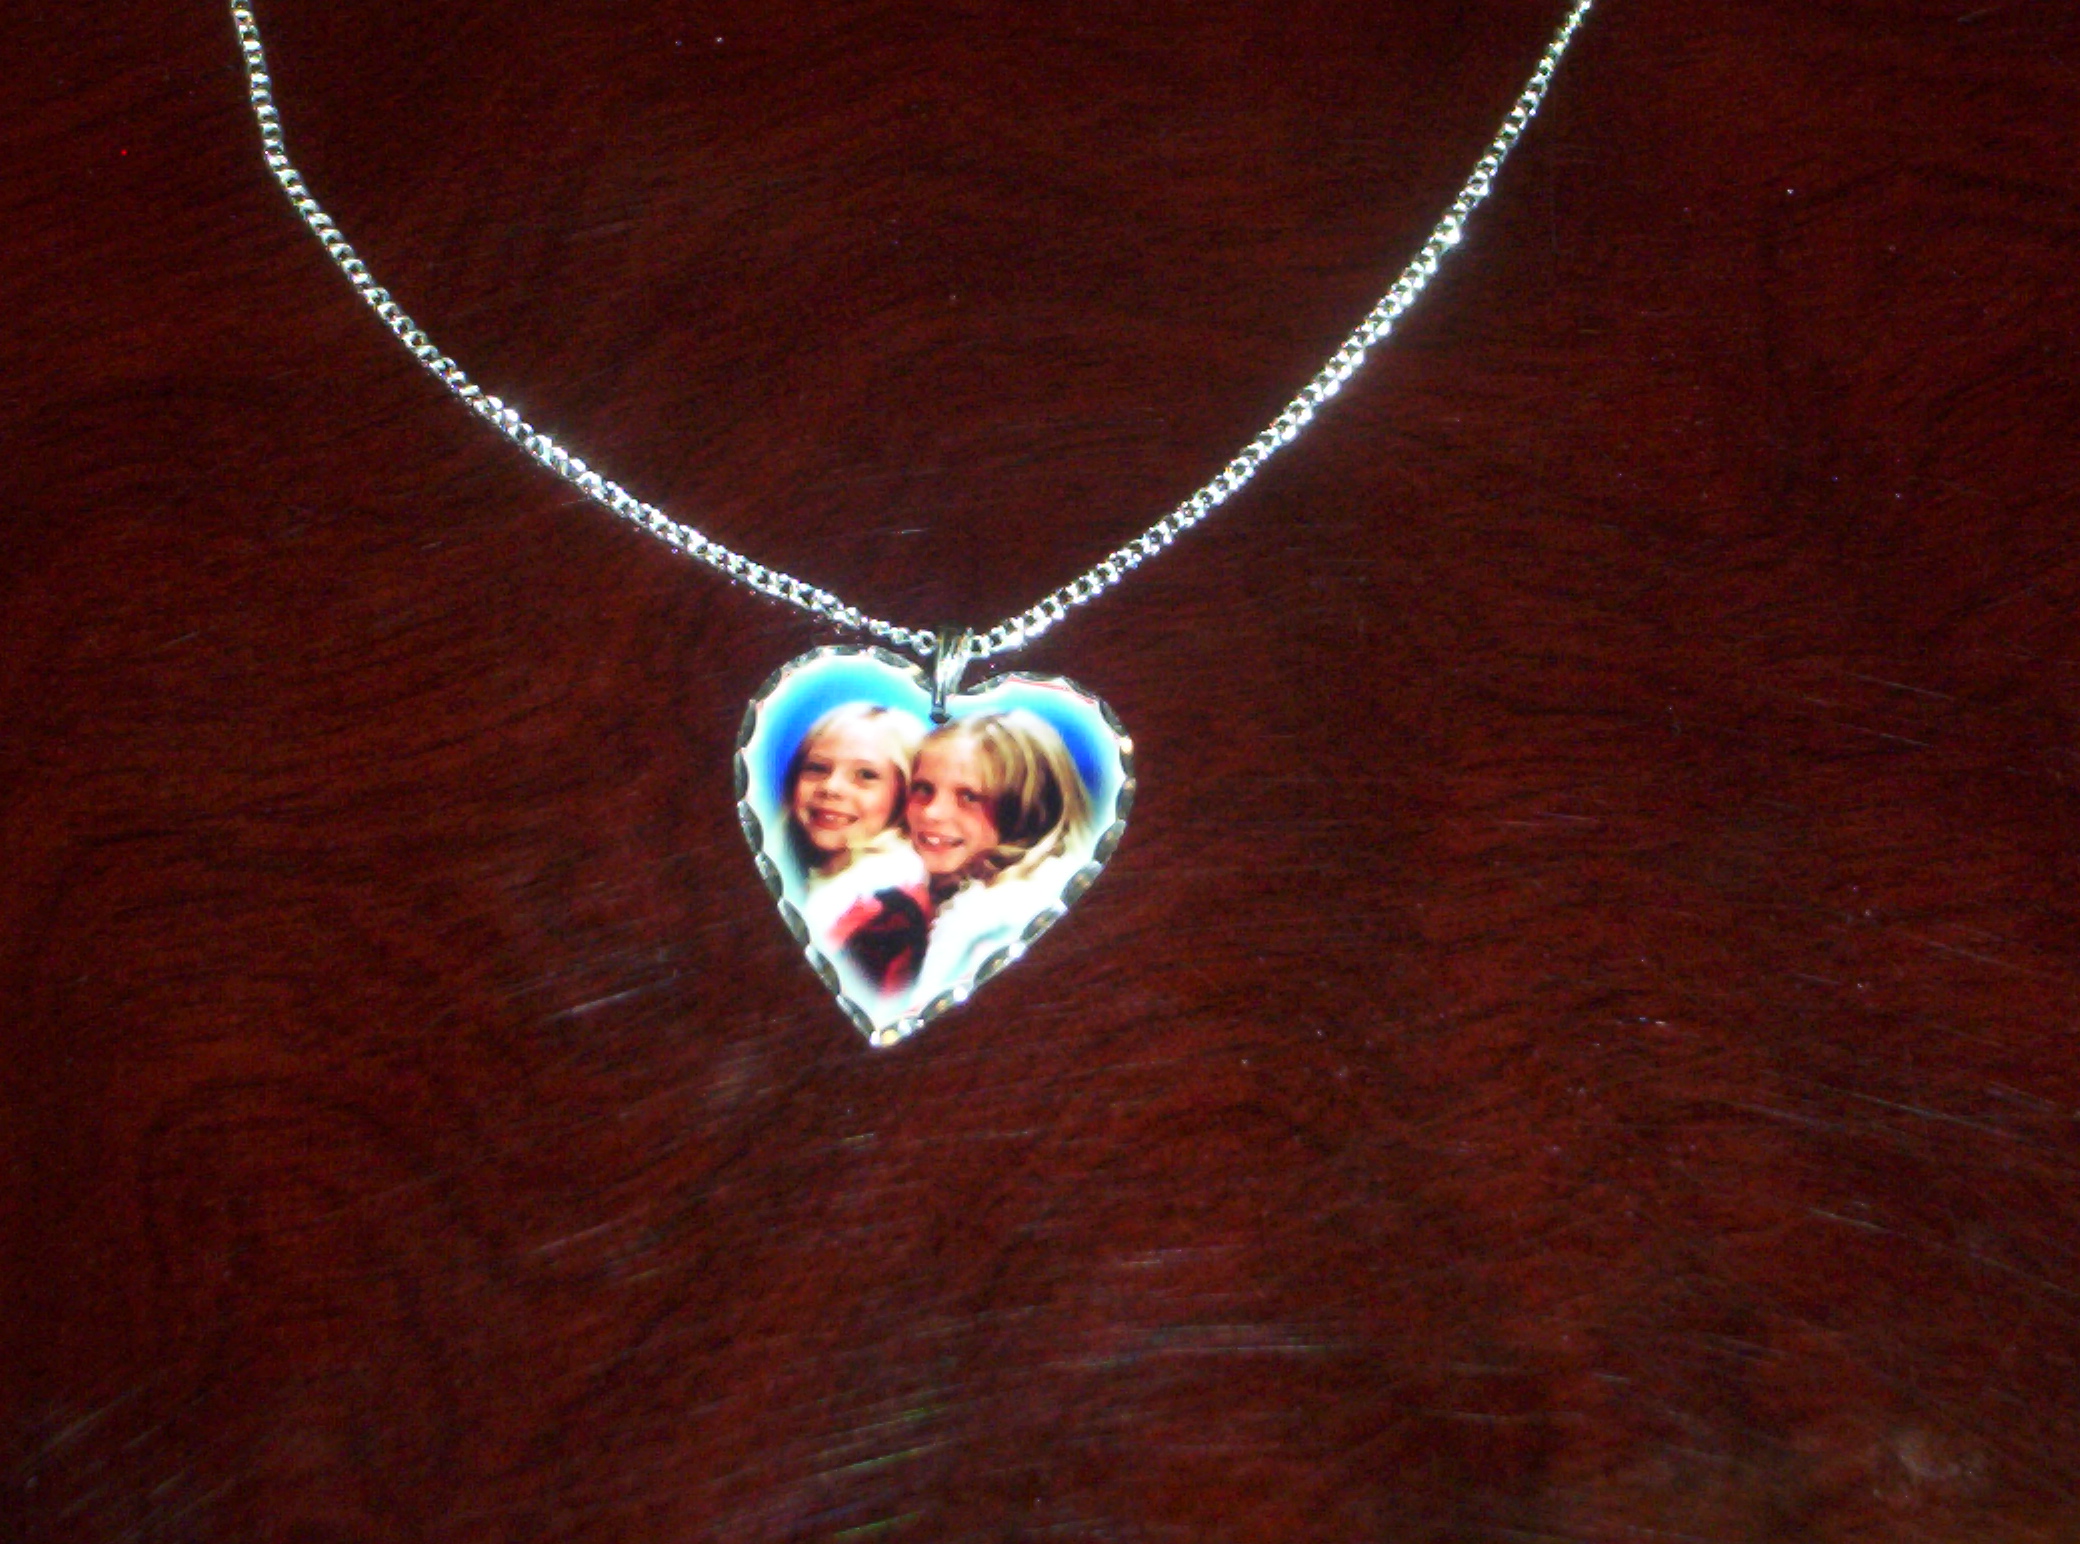 Heart Necklace made with sublimation printing